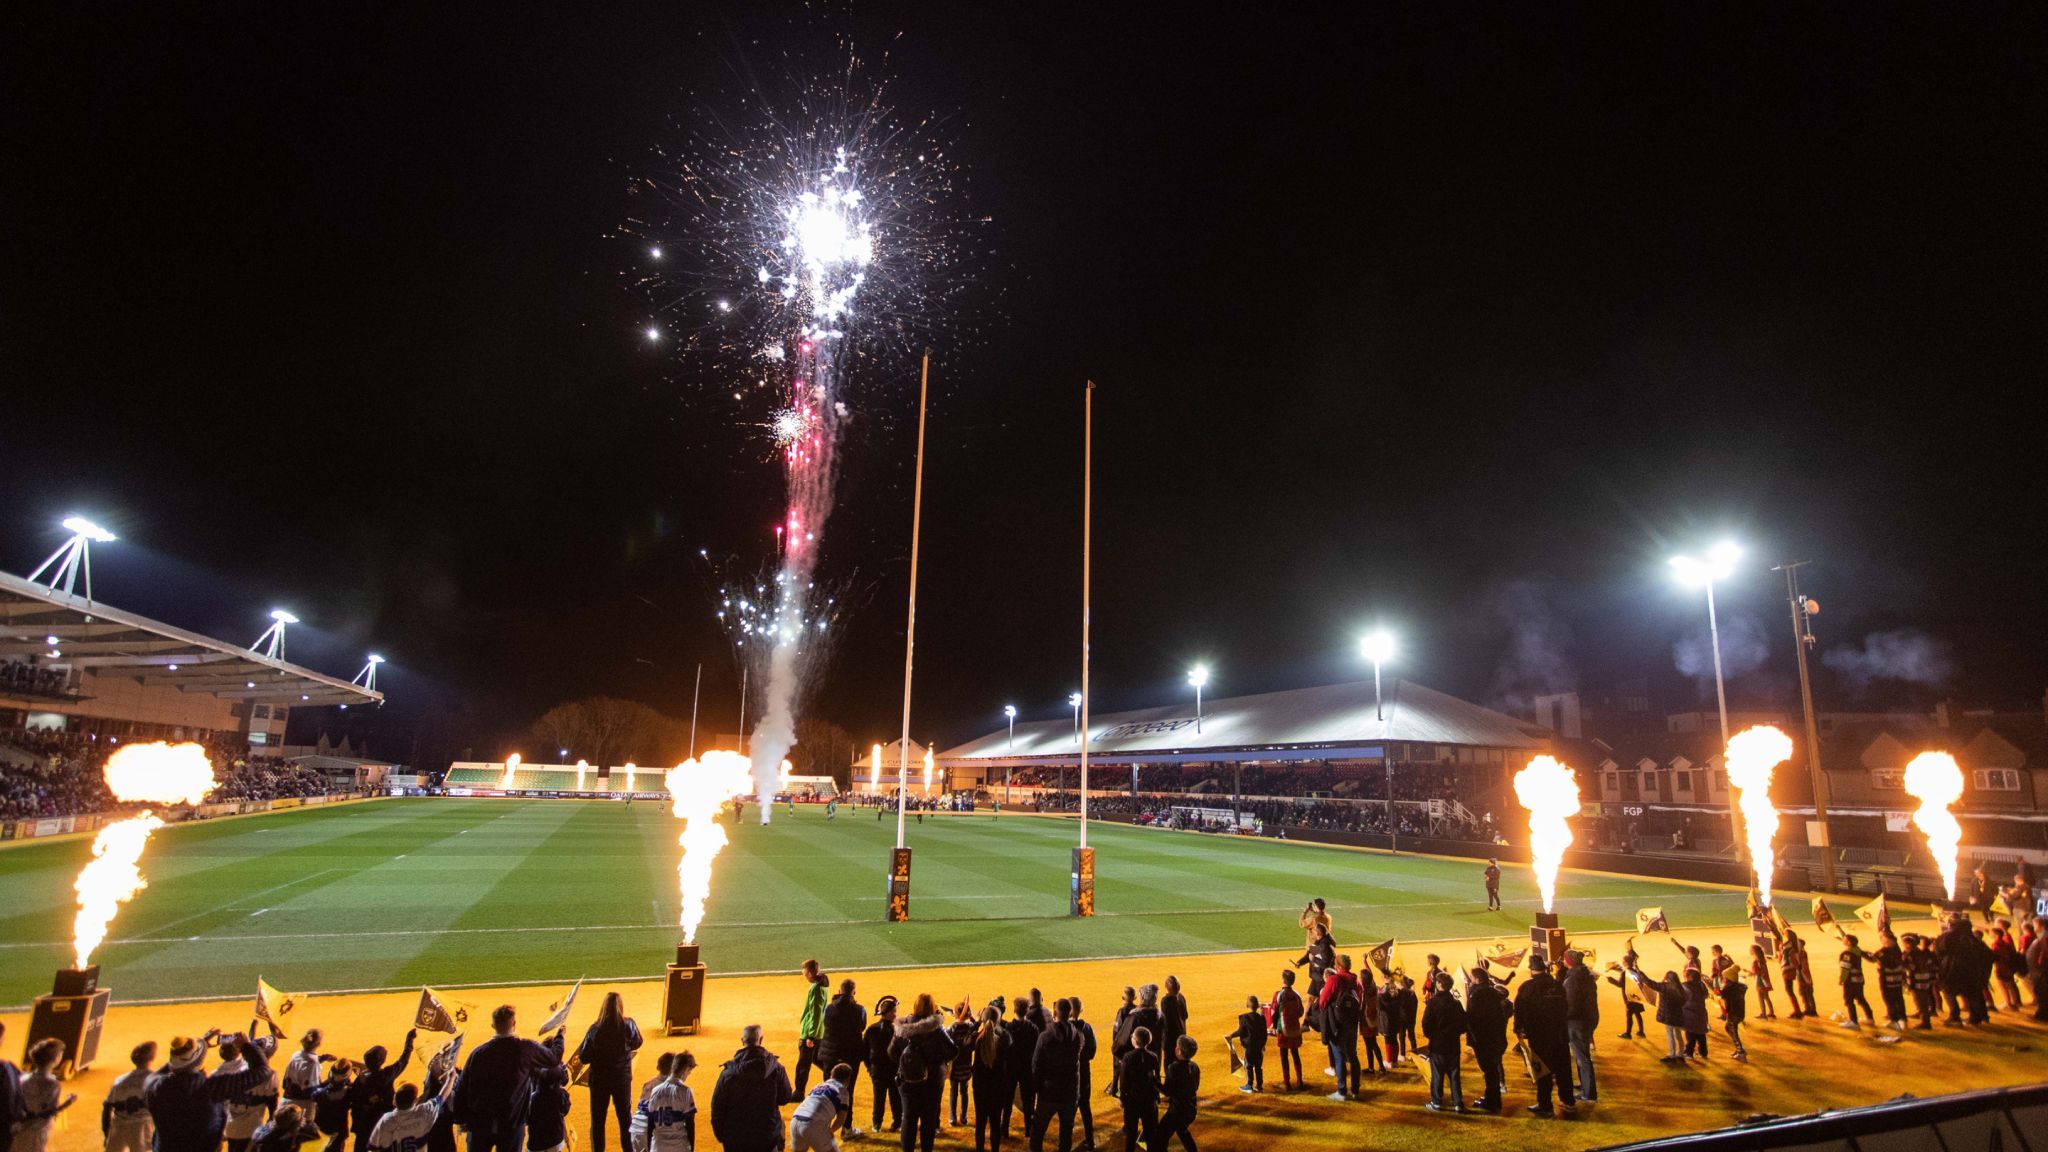 Pyrotechnics at Rodney Parade before a Dragons match